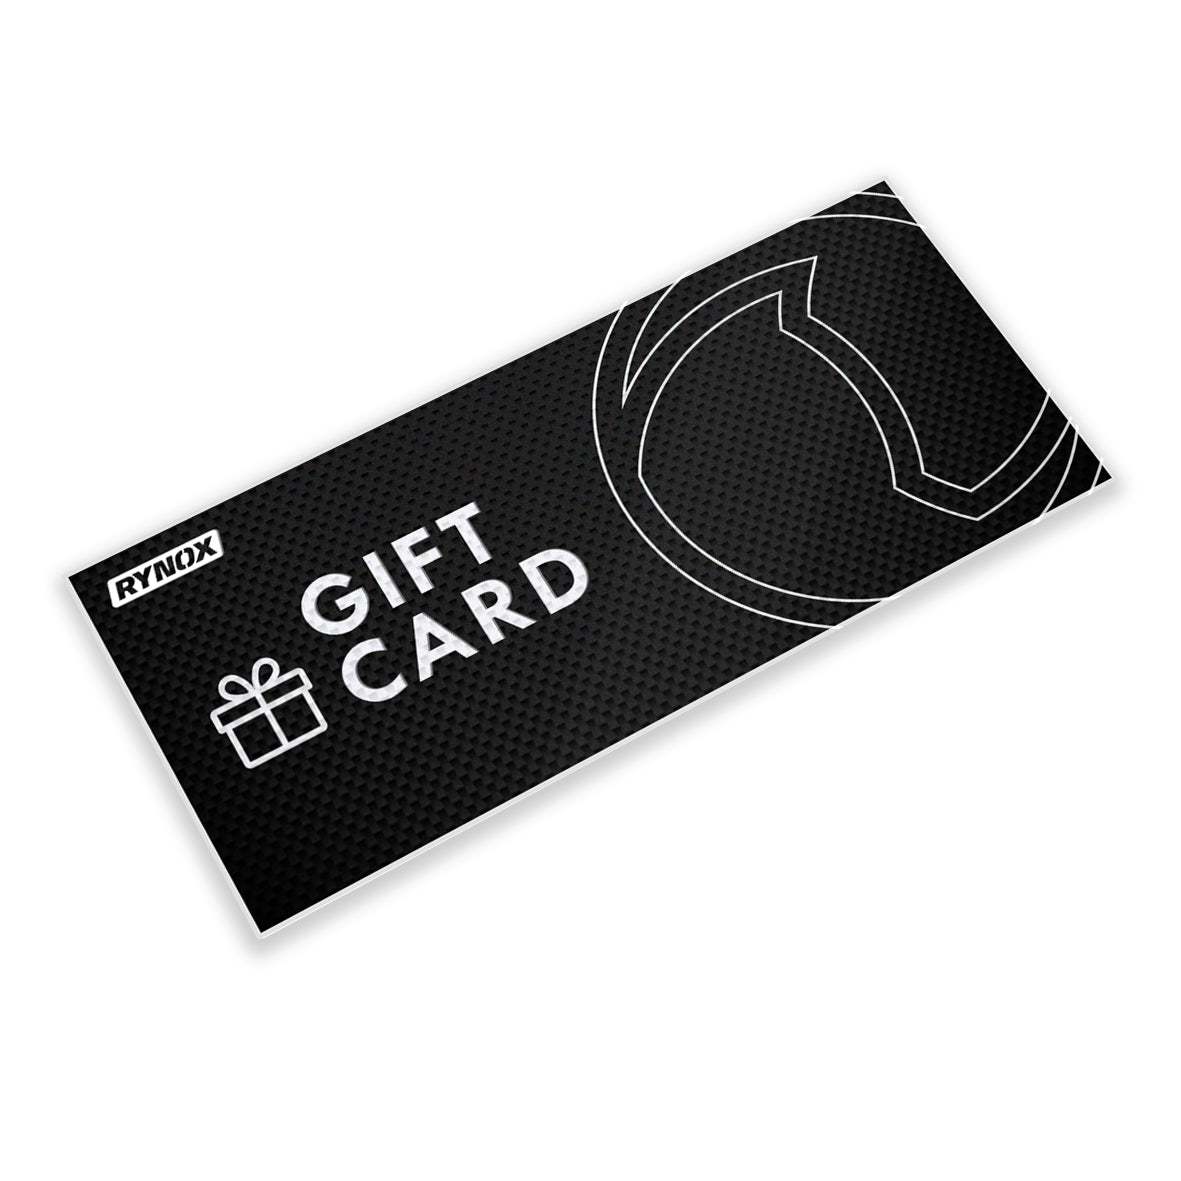 15 Best Digital Gift Cards to Spend on Food and Drinks in 2023 - CNET